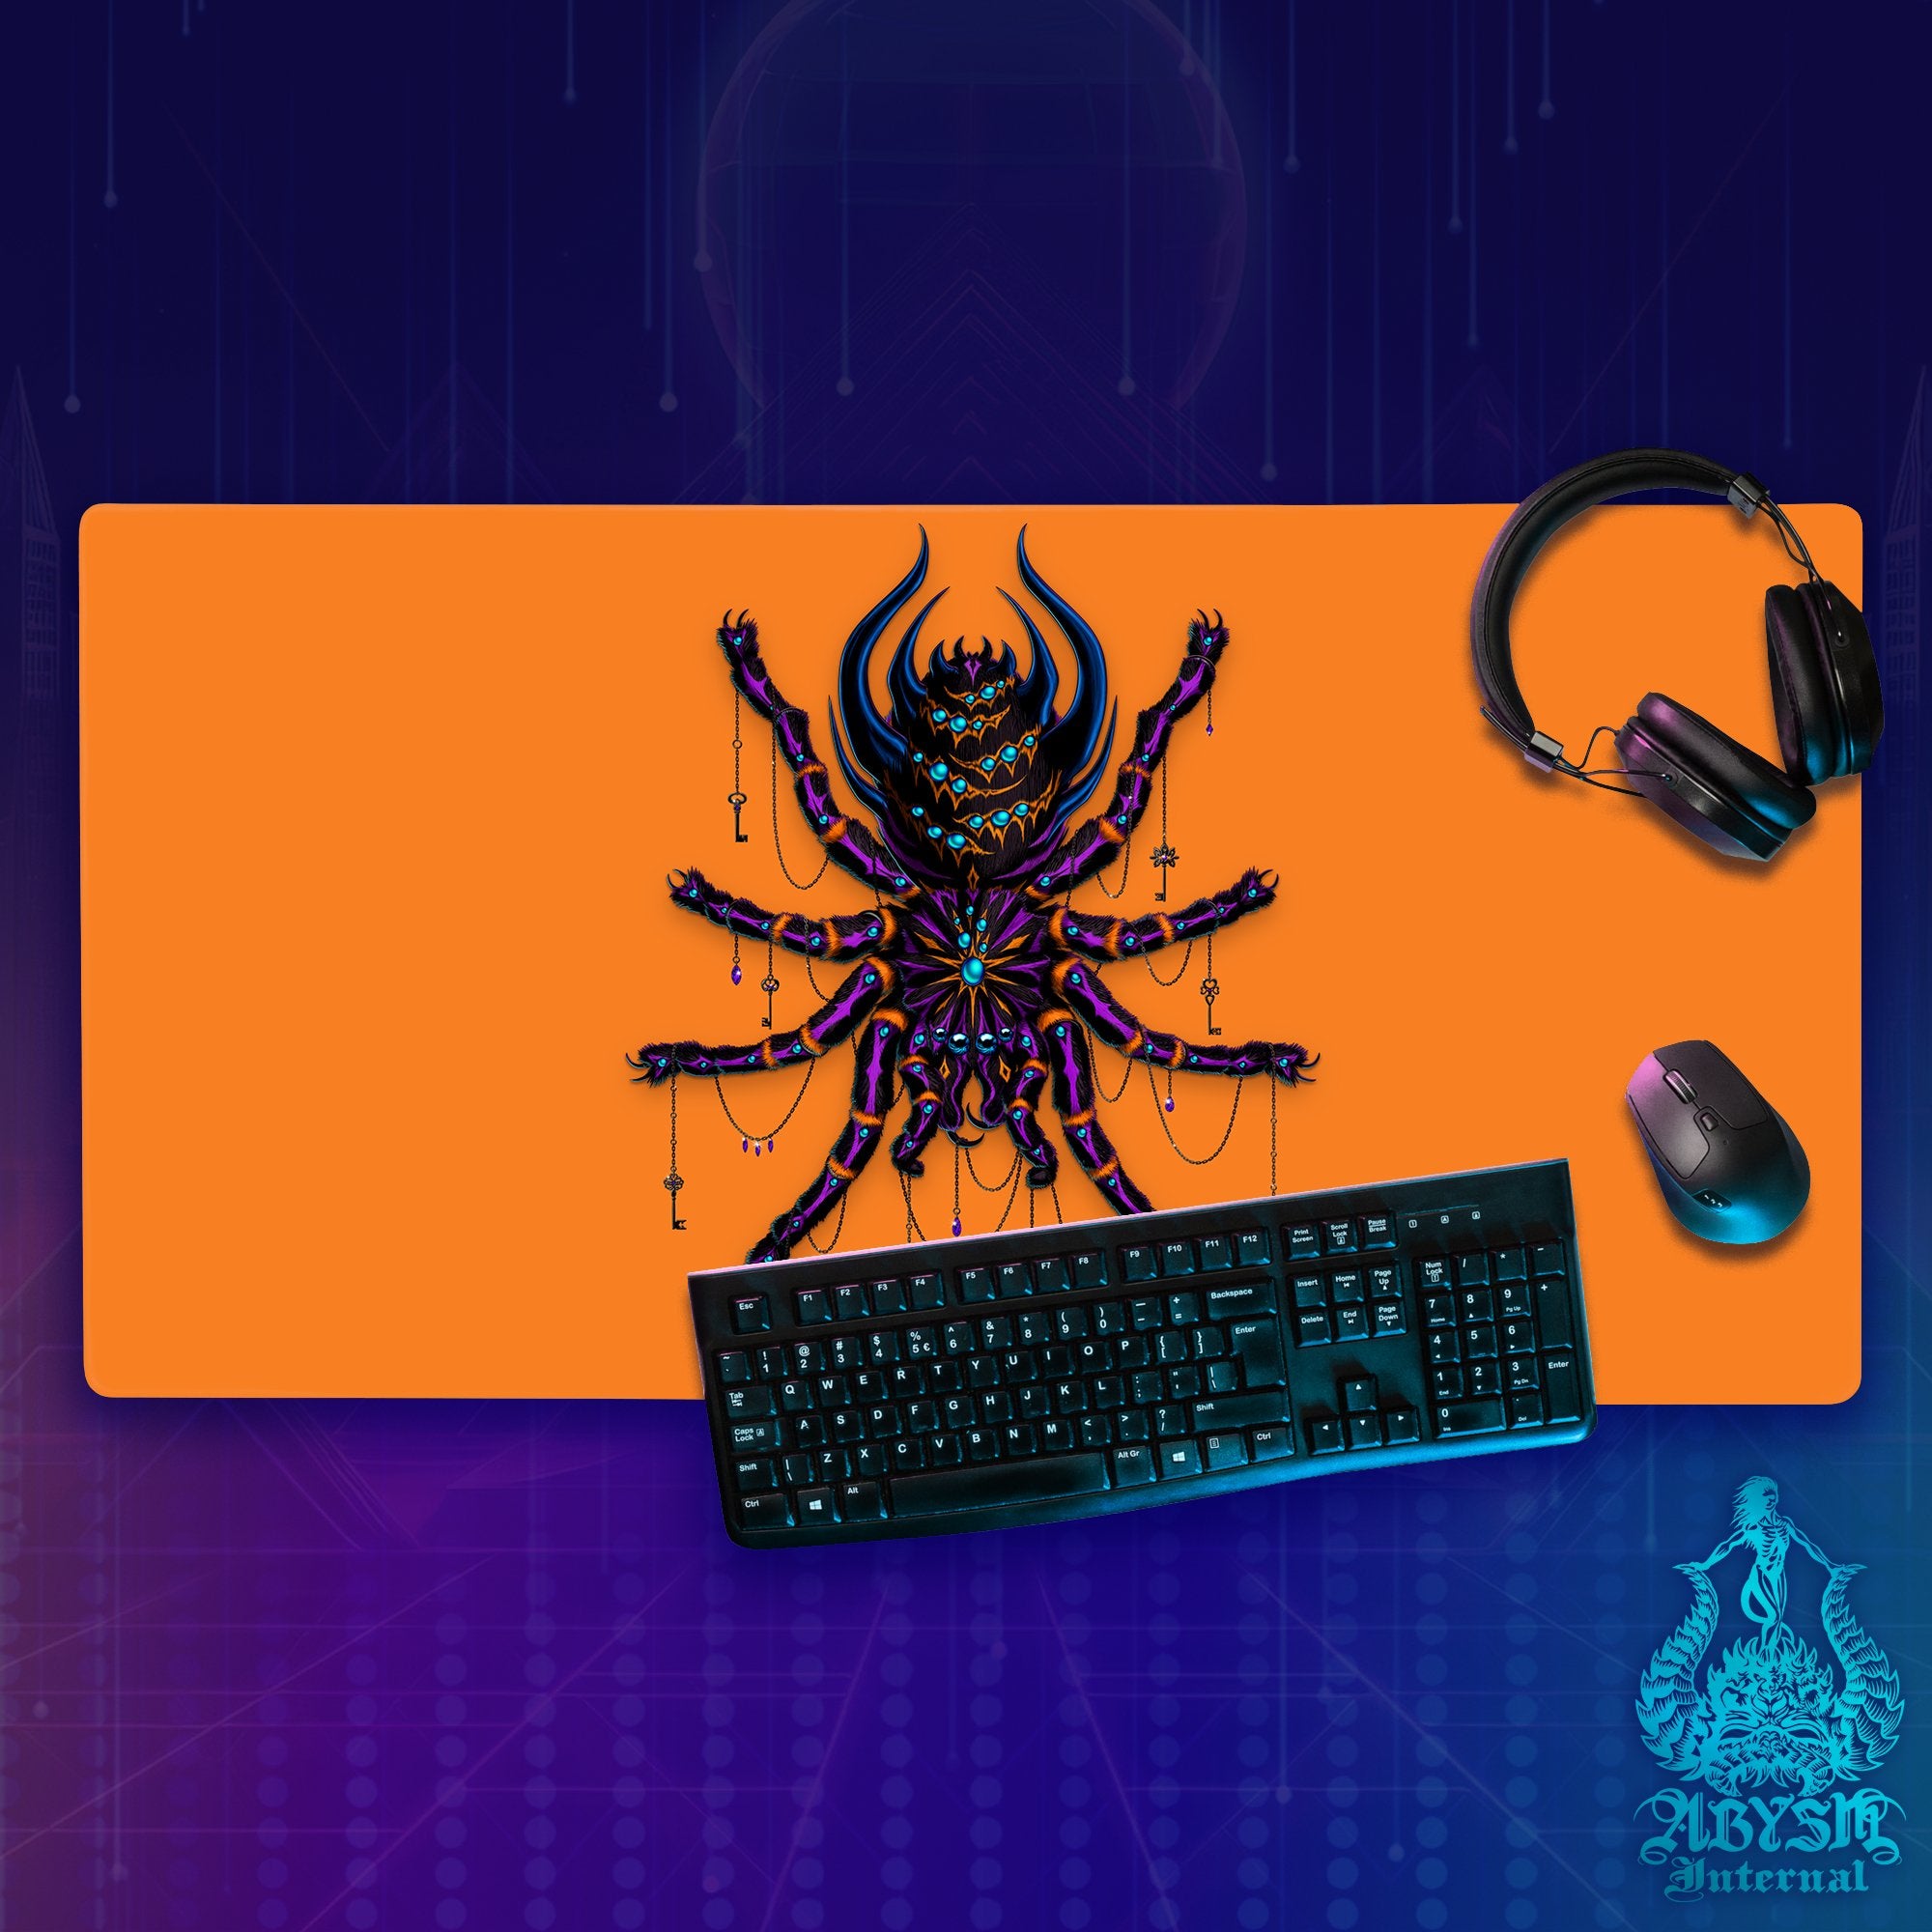 Halloween Mouse Pad, Neon Goth Gaming Desk Mat, Spider Workpad, Gamer Table Protector Cover, Tarantula Art Print - Abysm Internal